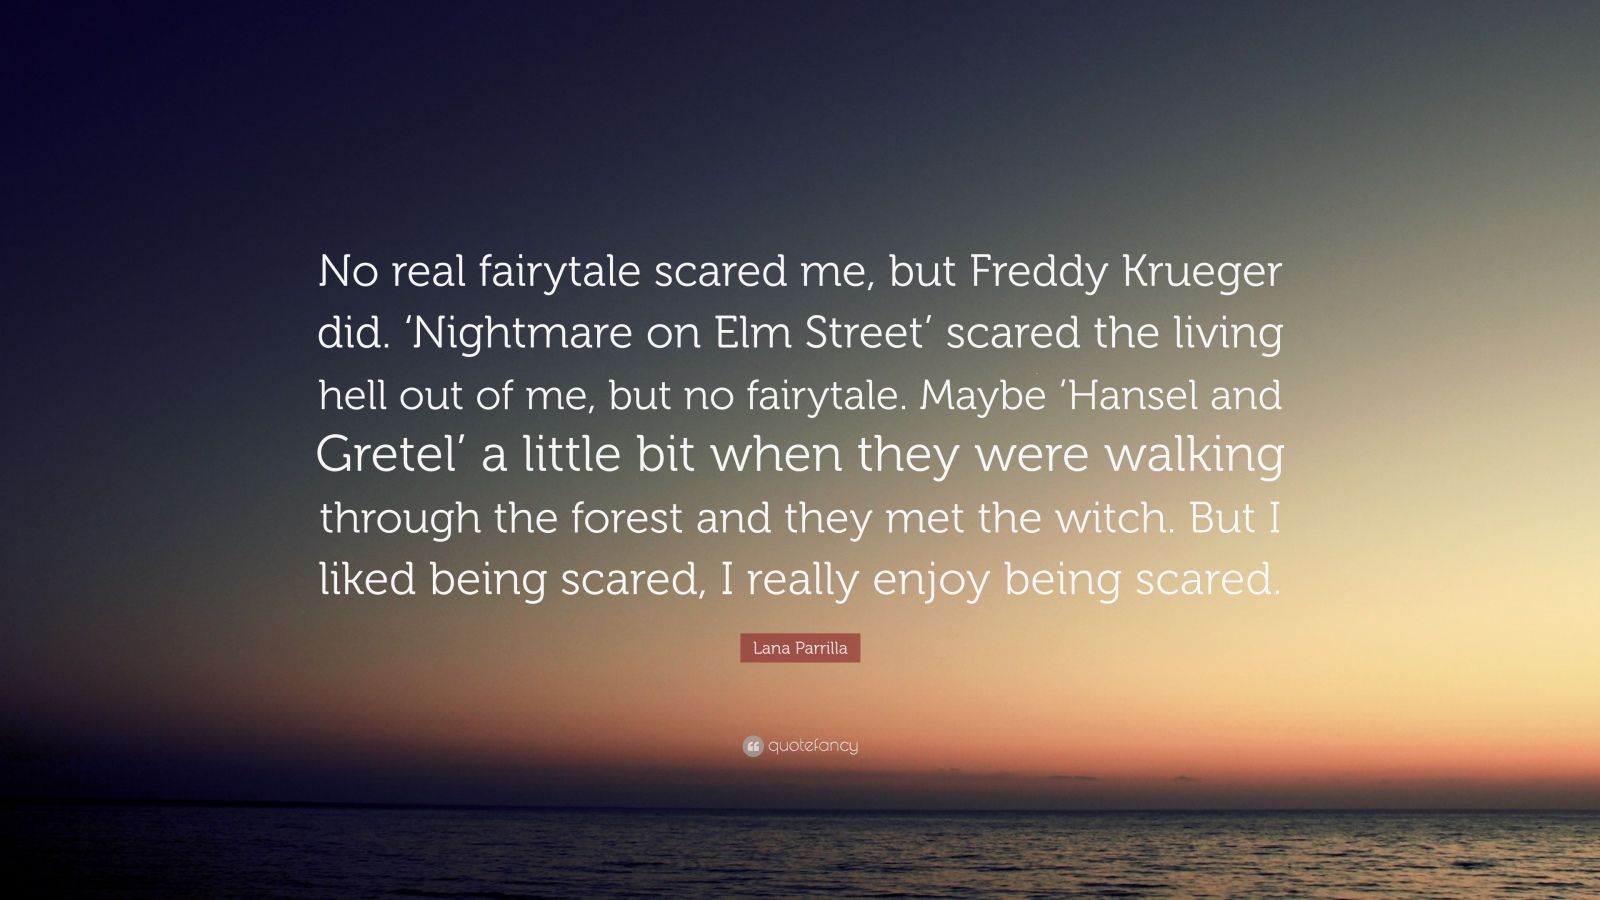 Lana Parrilla Quote: “No real fairytale scared me, but Freddy